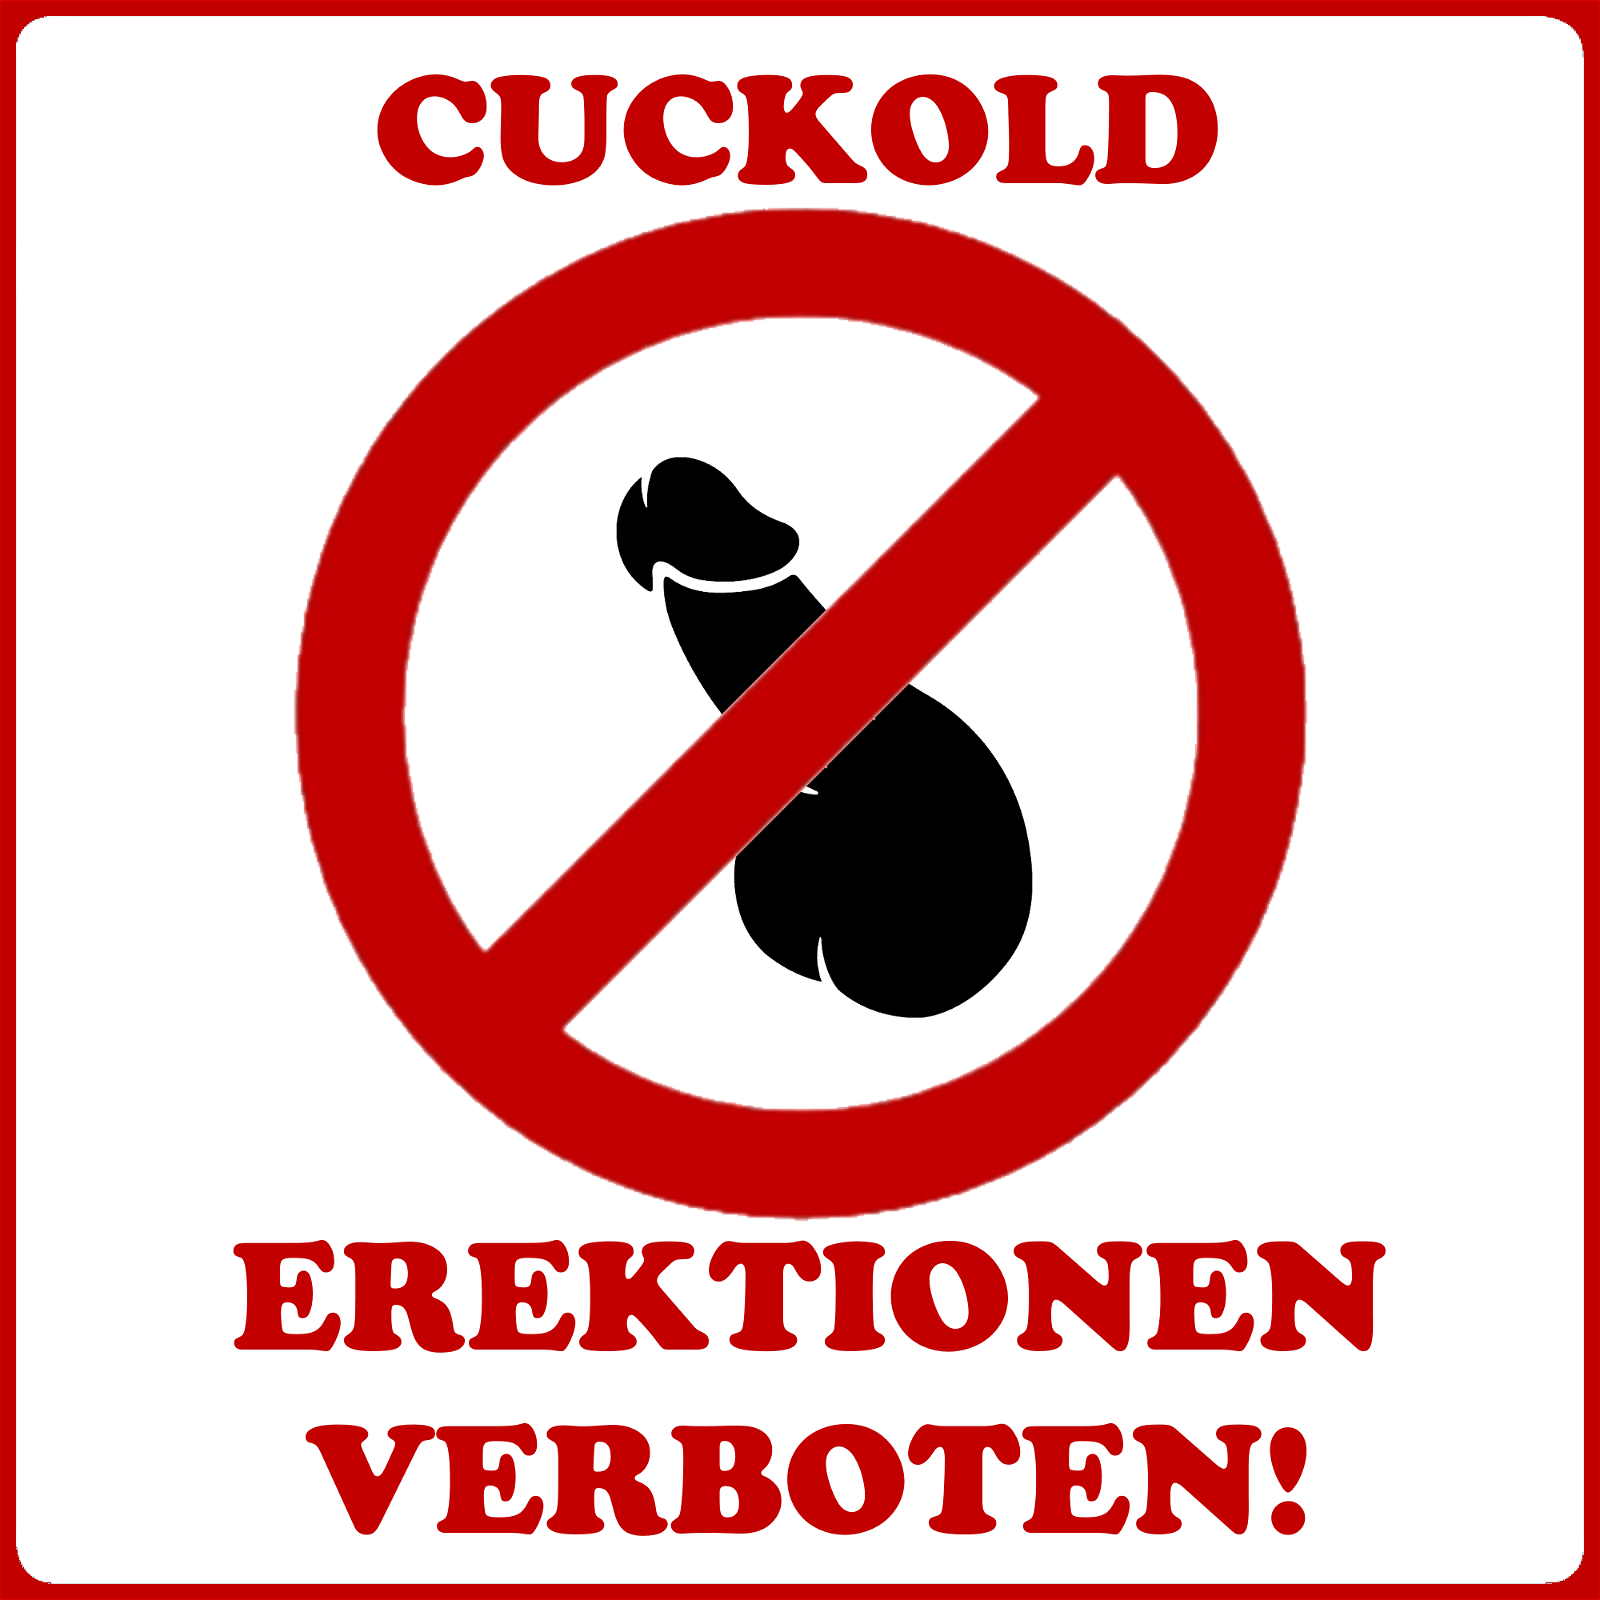 Photo by Nutzvieh with the username @nutzvieh, who is a verified user,  November 1, 2022 at 5:30 PM. The post is about the topic Pictograms - Piktogramme and the text says 'Cuckold'